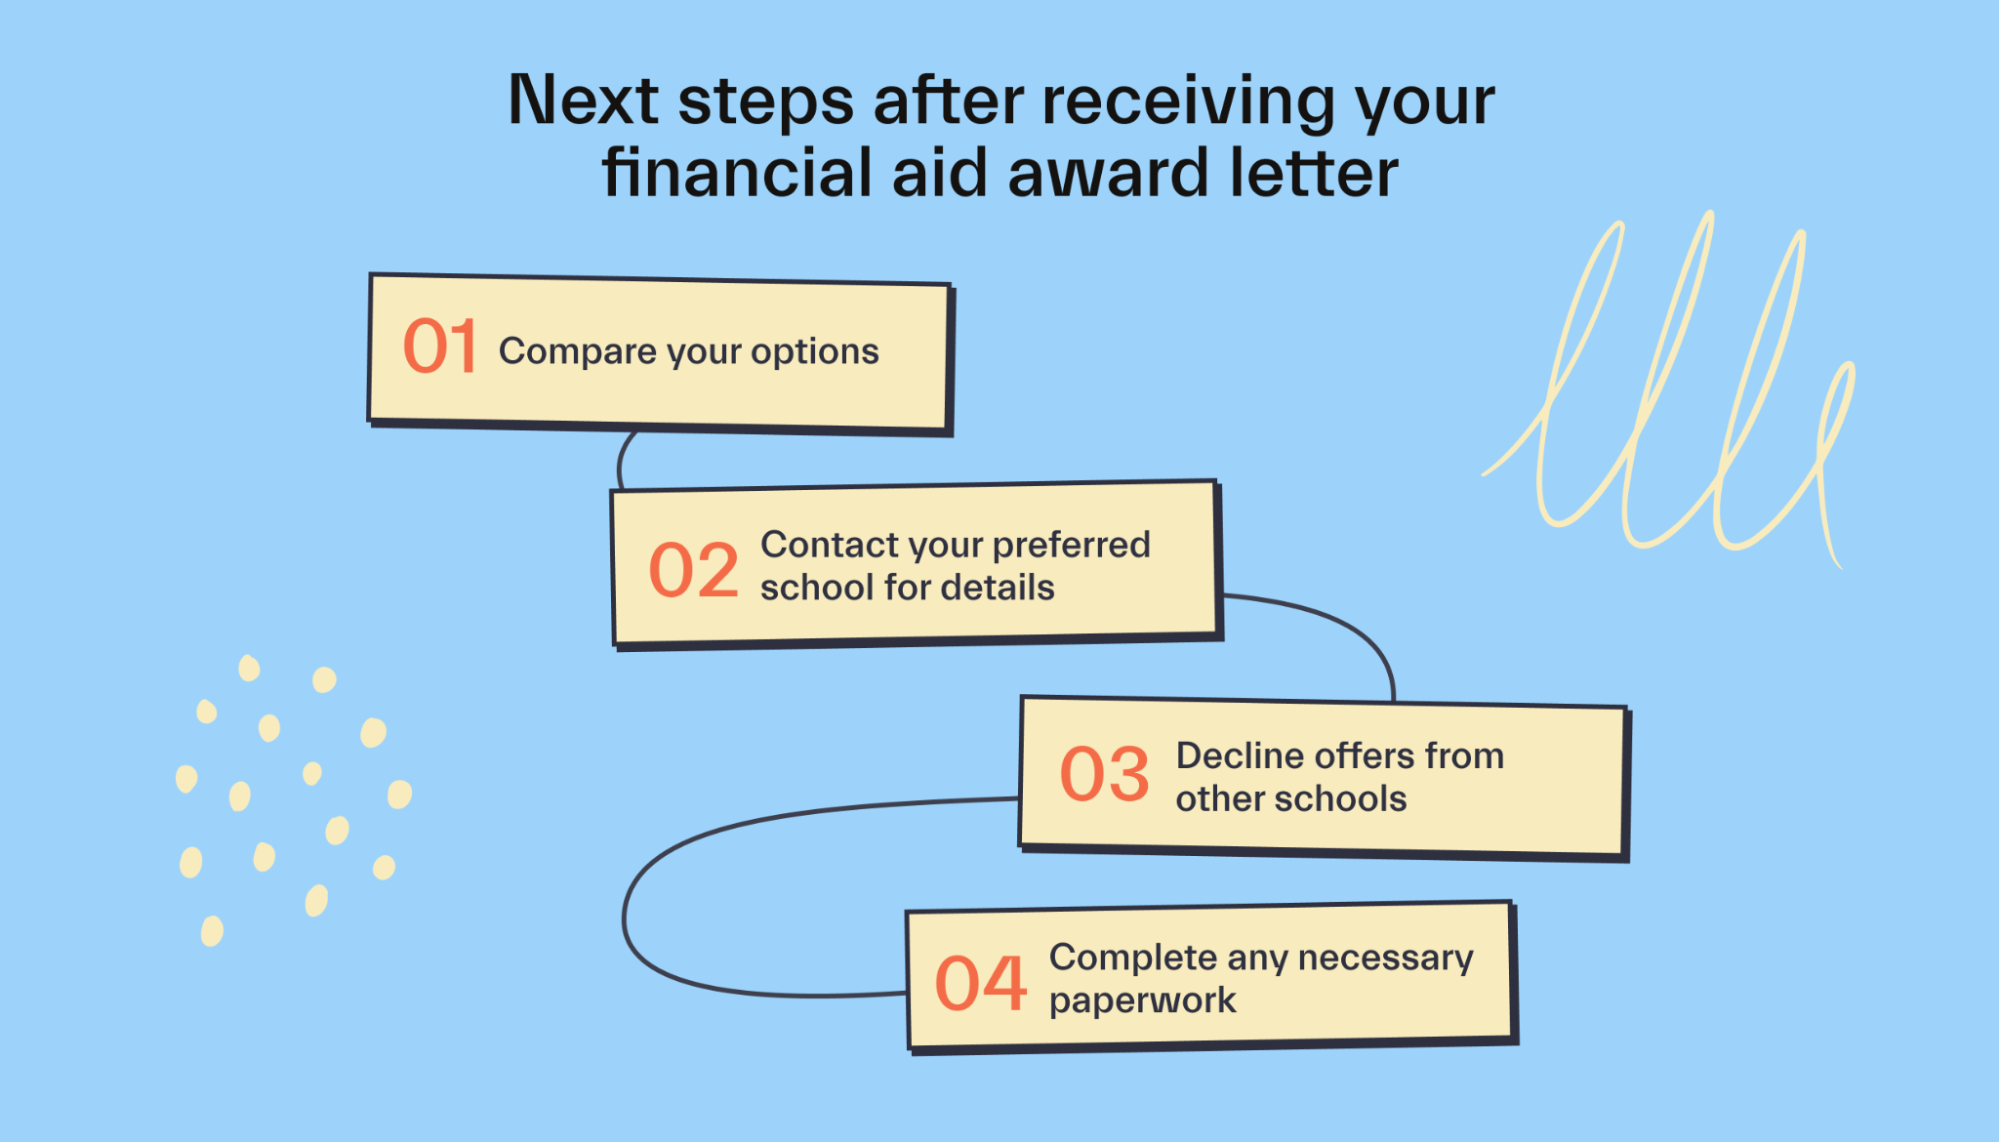 Next steps after receiving financial aid letter